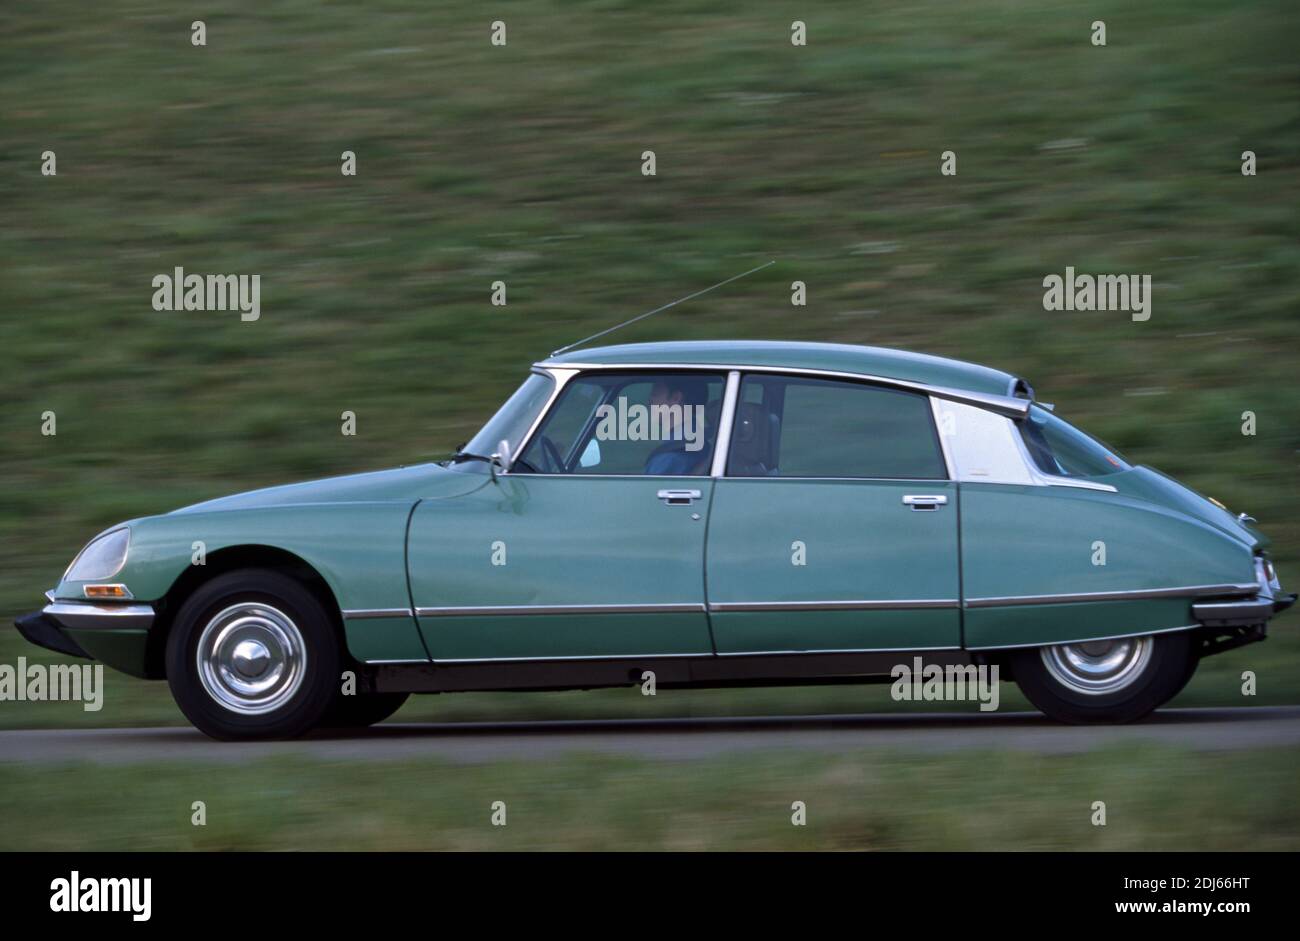 Citroen Ds 23 High Resolution Stock Photography and Images - Alamy